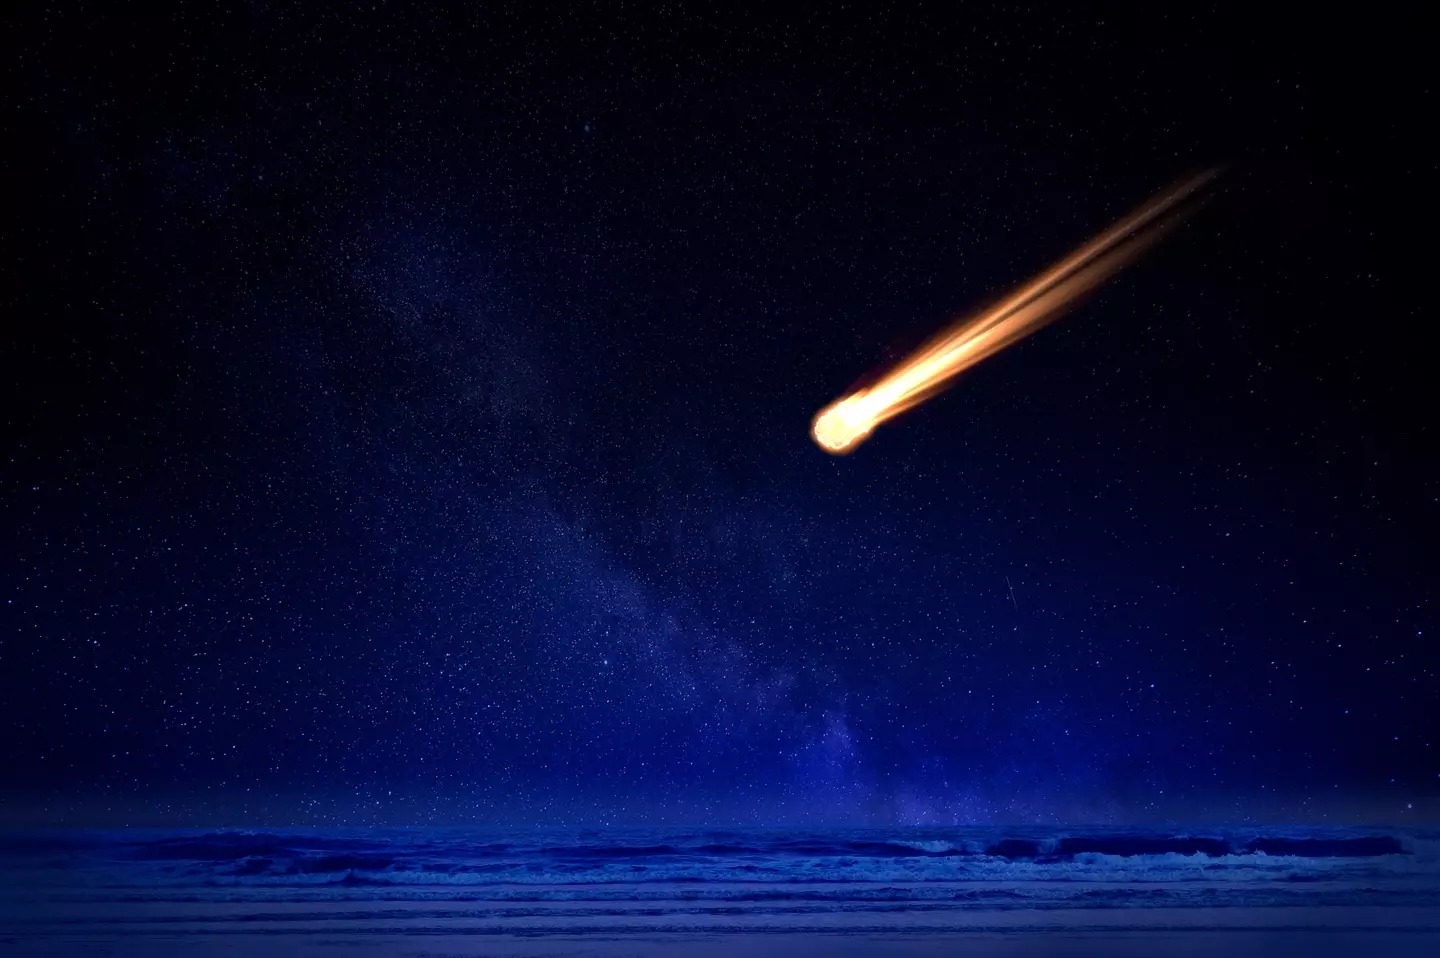 Asteroid impacts happen more often than we might think.